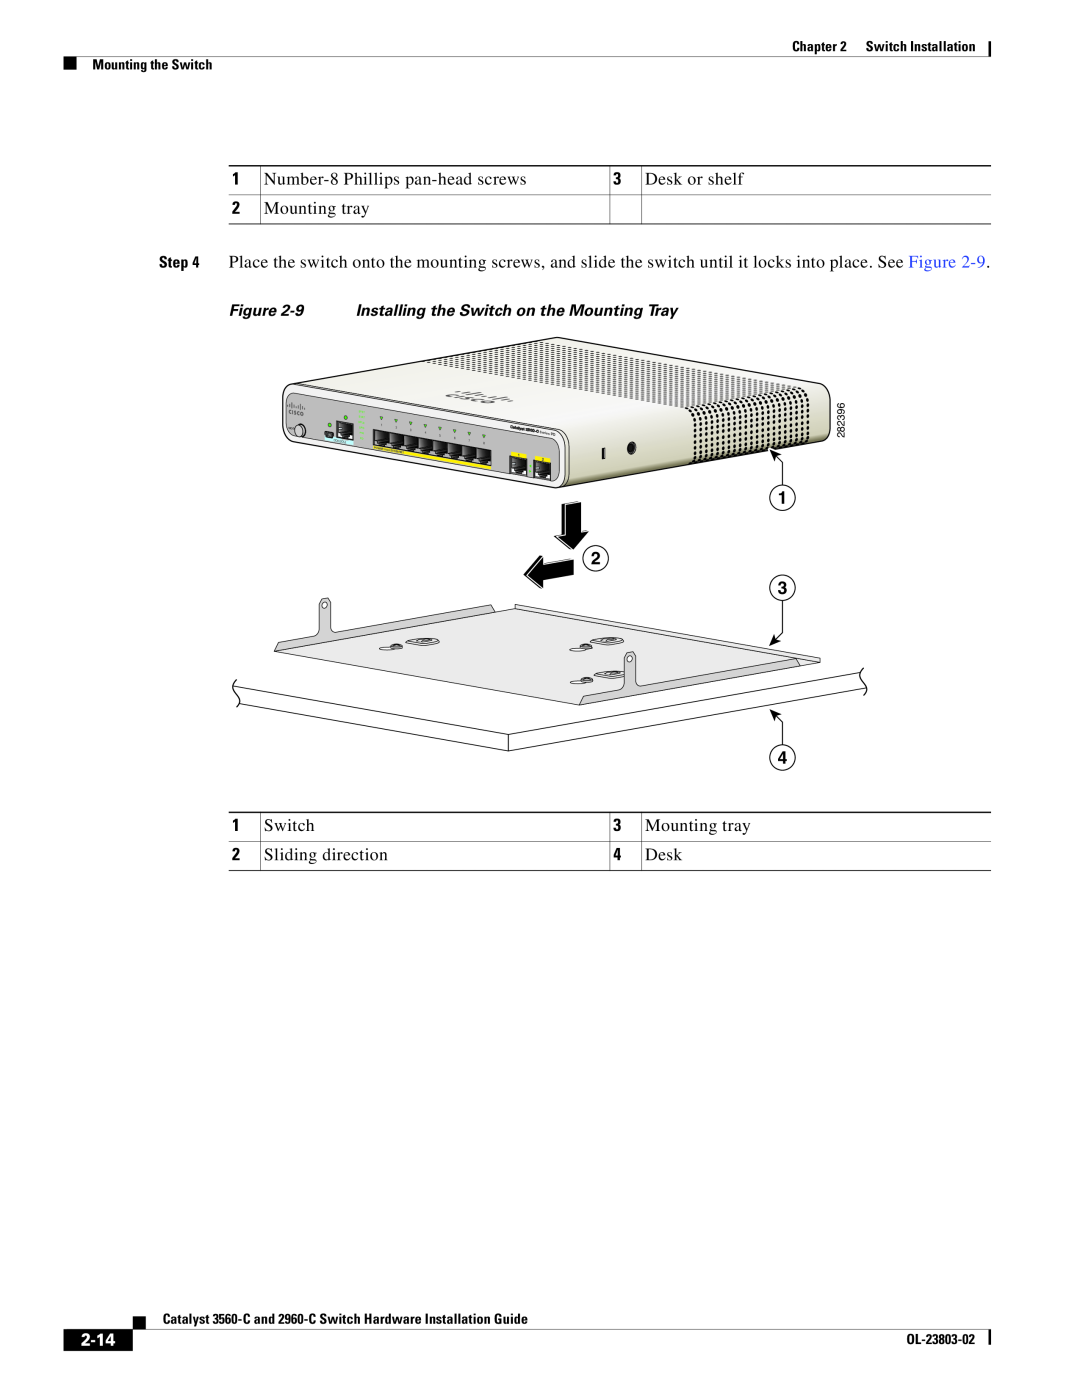 Cisco Systems N55M4Q manual 2-14, 9 Installing the Switch on the Mounting Tray, Onsole 